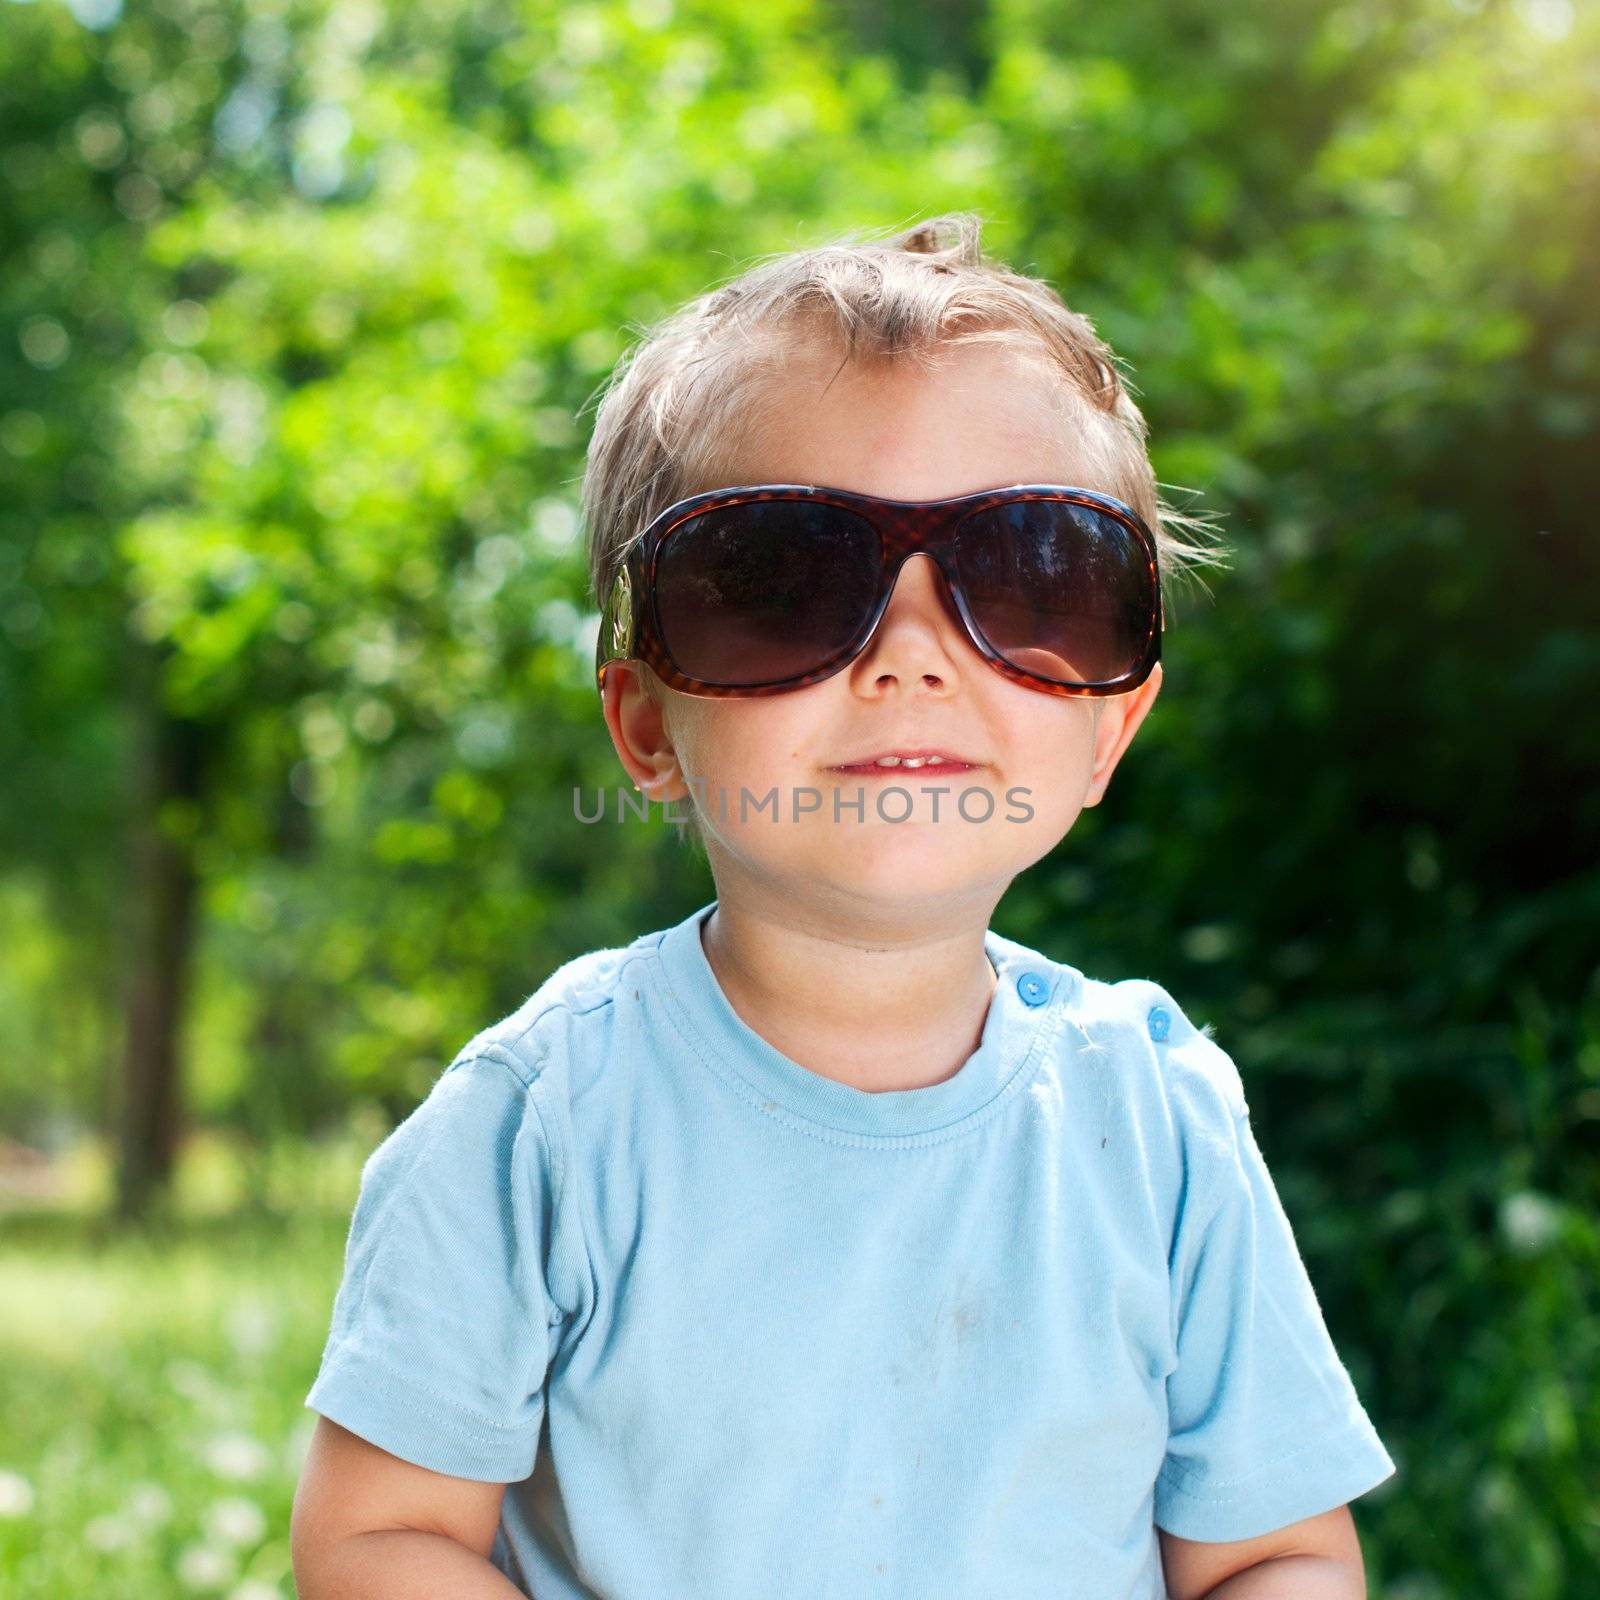 Cute 2 years old boy Sunglasses outdoors at sunny summer day